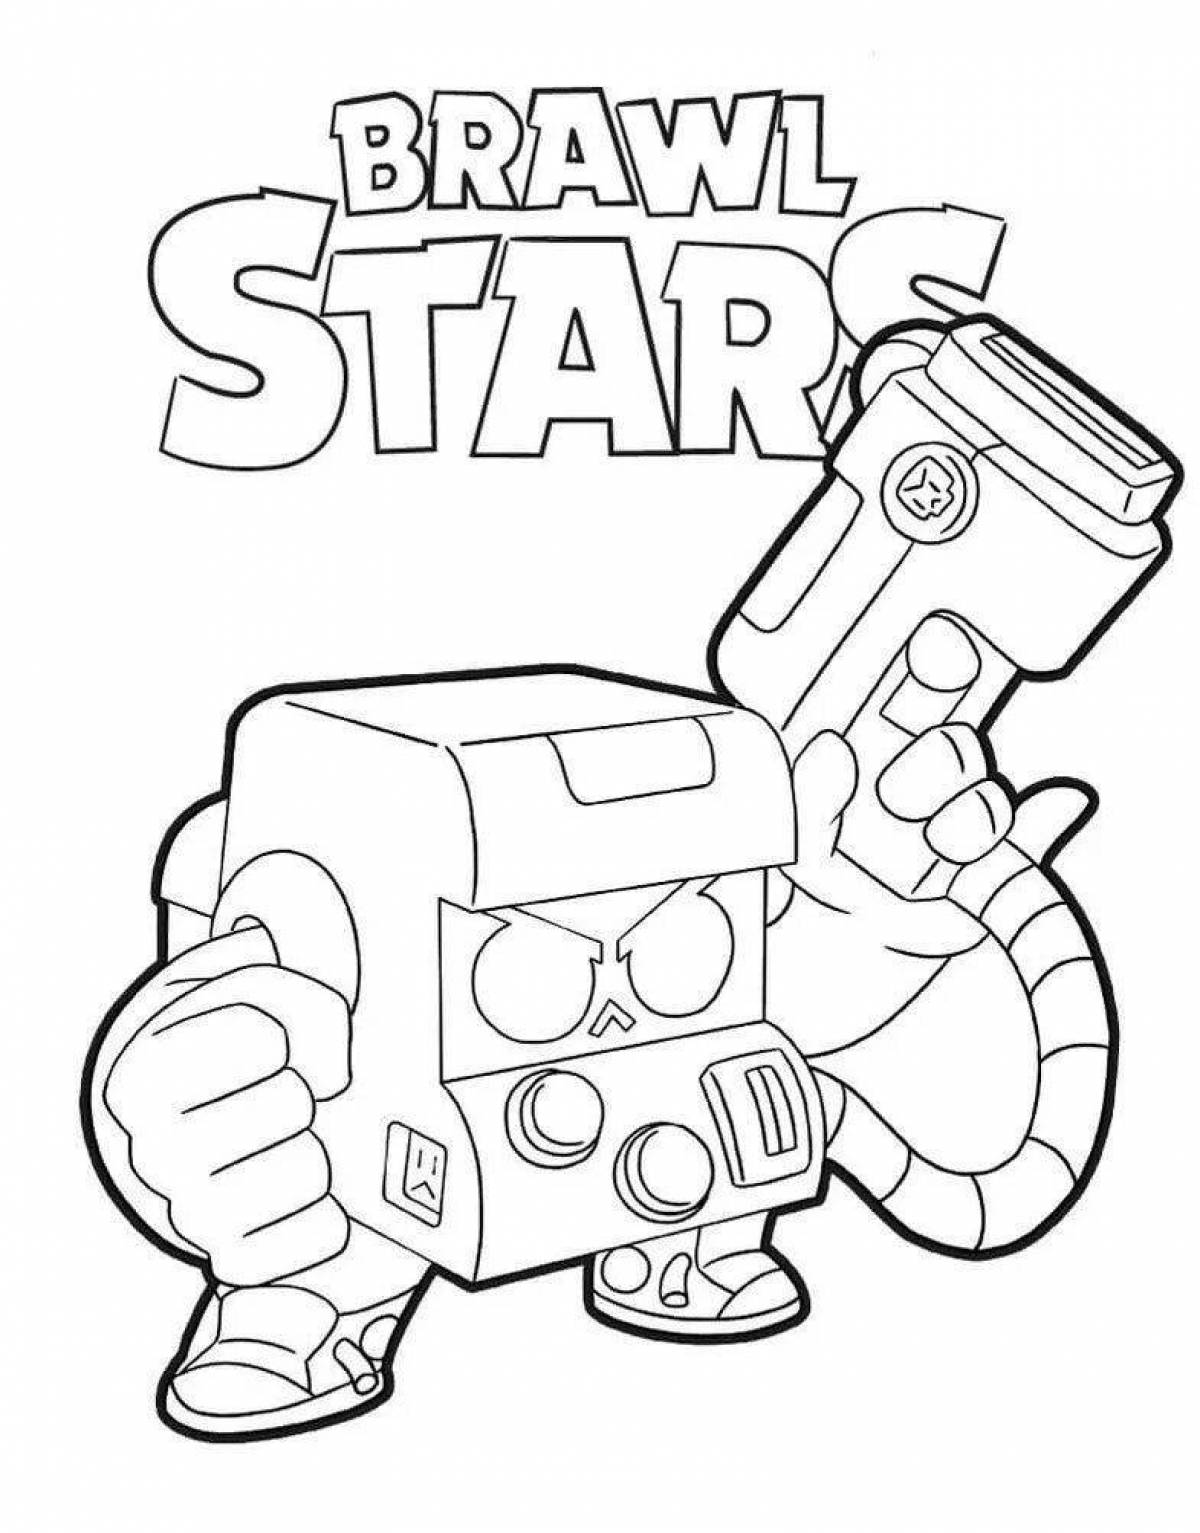 Dazzling braver stars coloring page